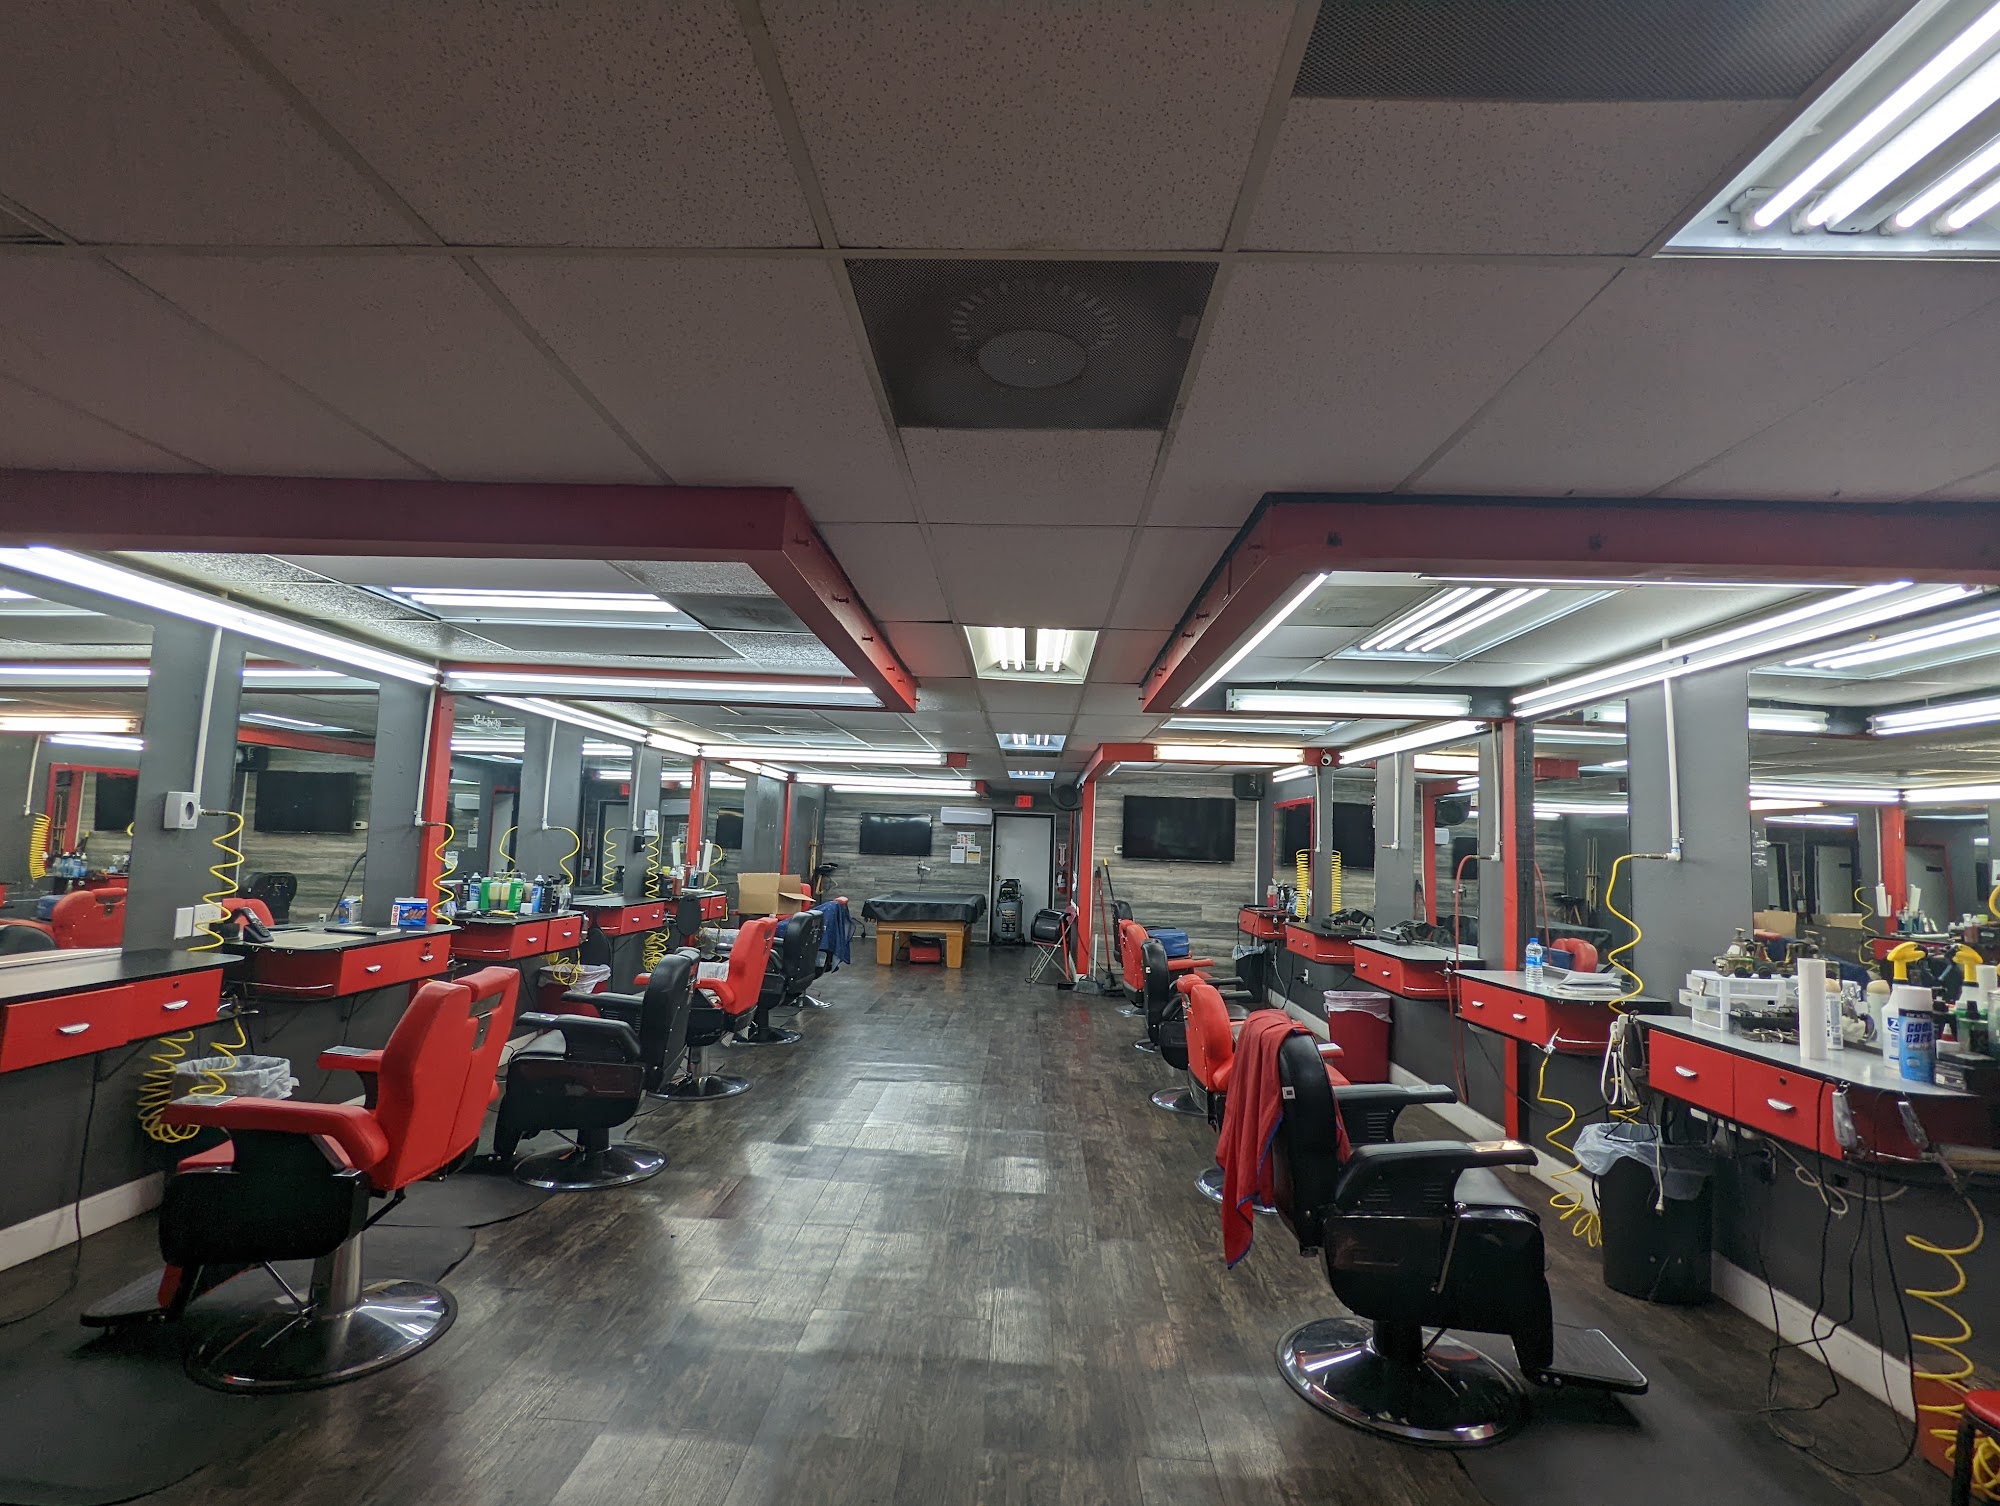 The Zone Barber Shop